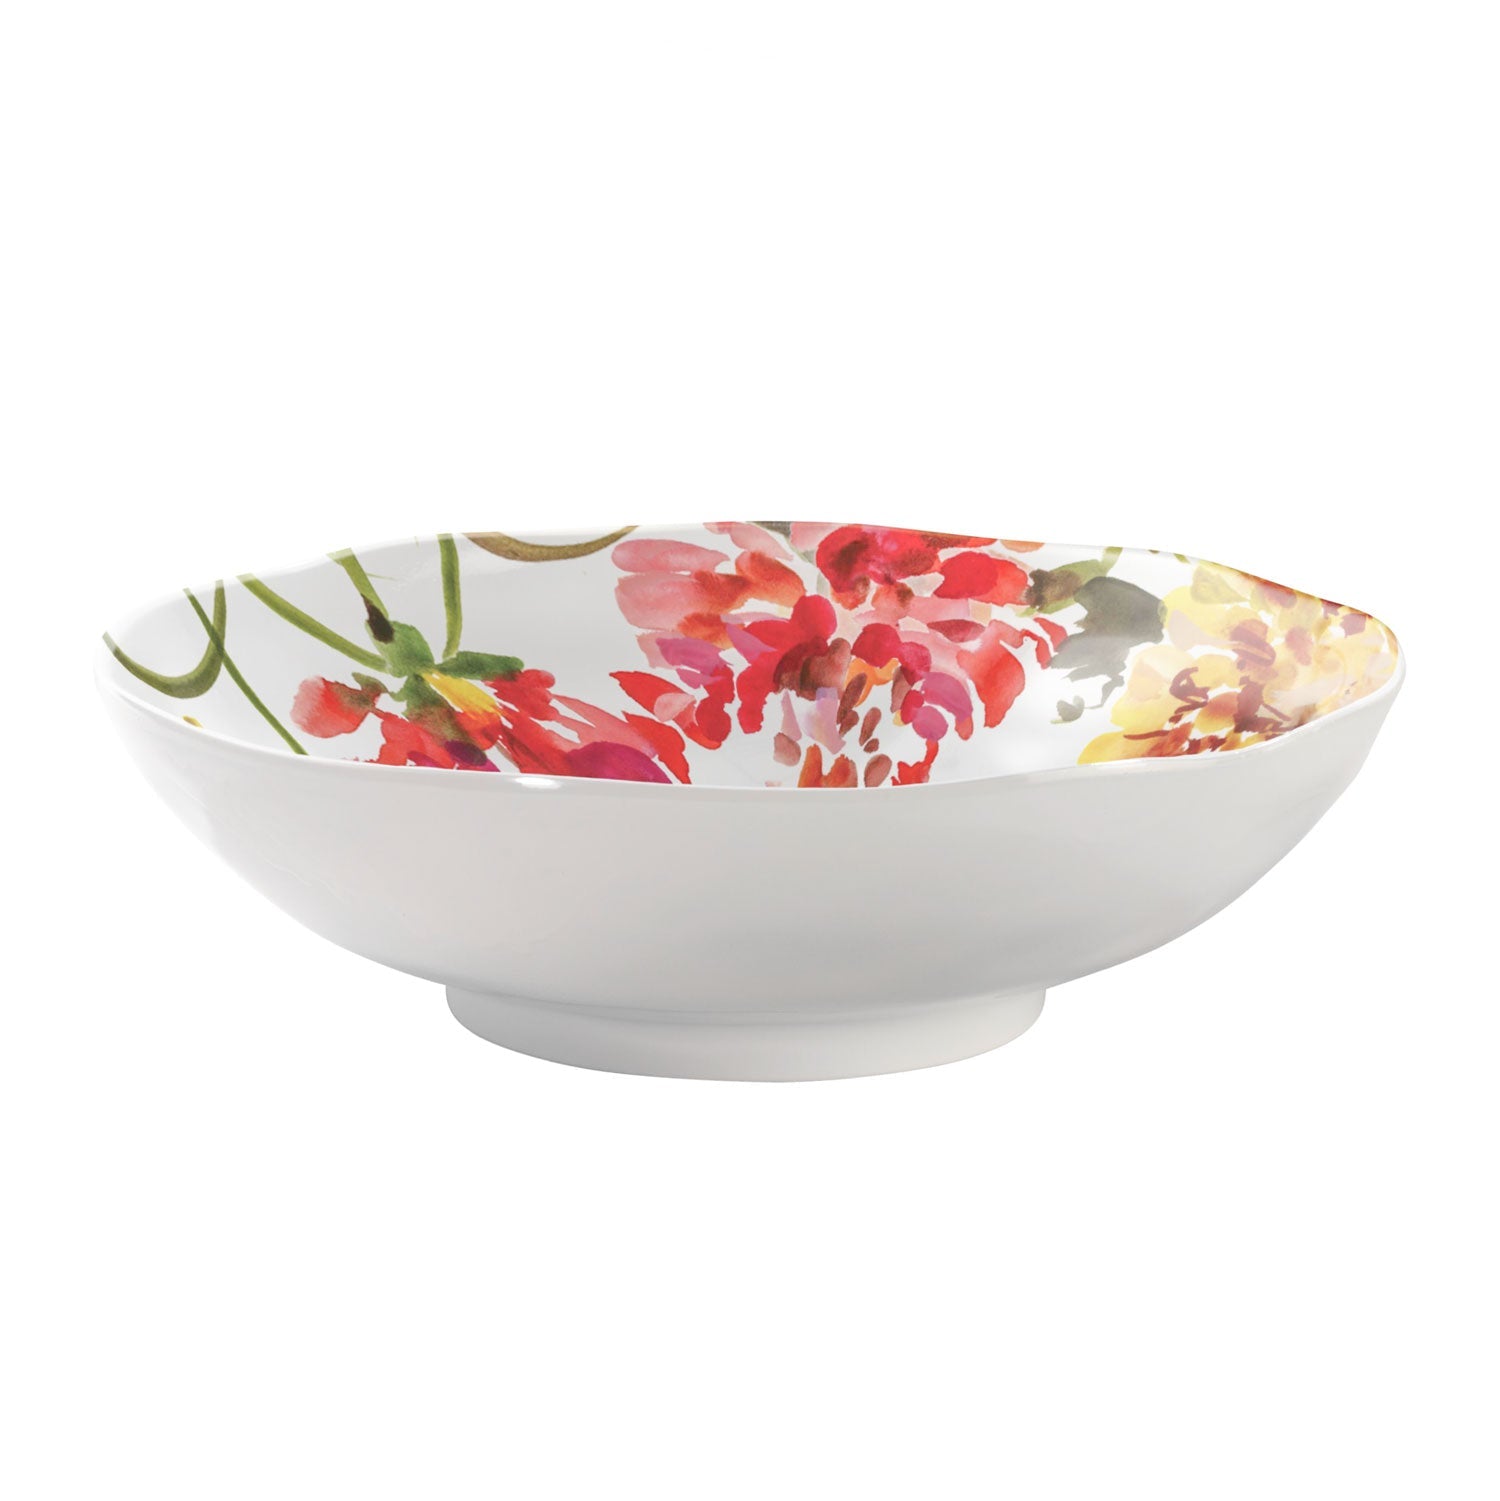 White, 12 inch melamine serving bowl, Garden Brights Collection by Kelly Ventura